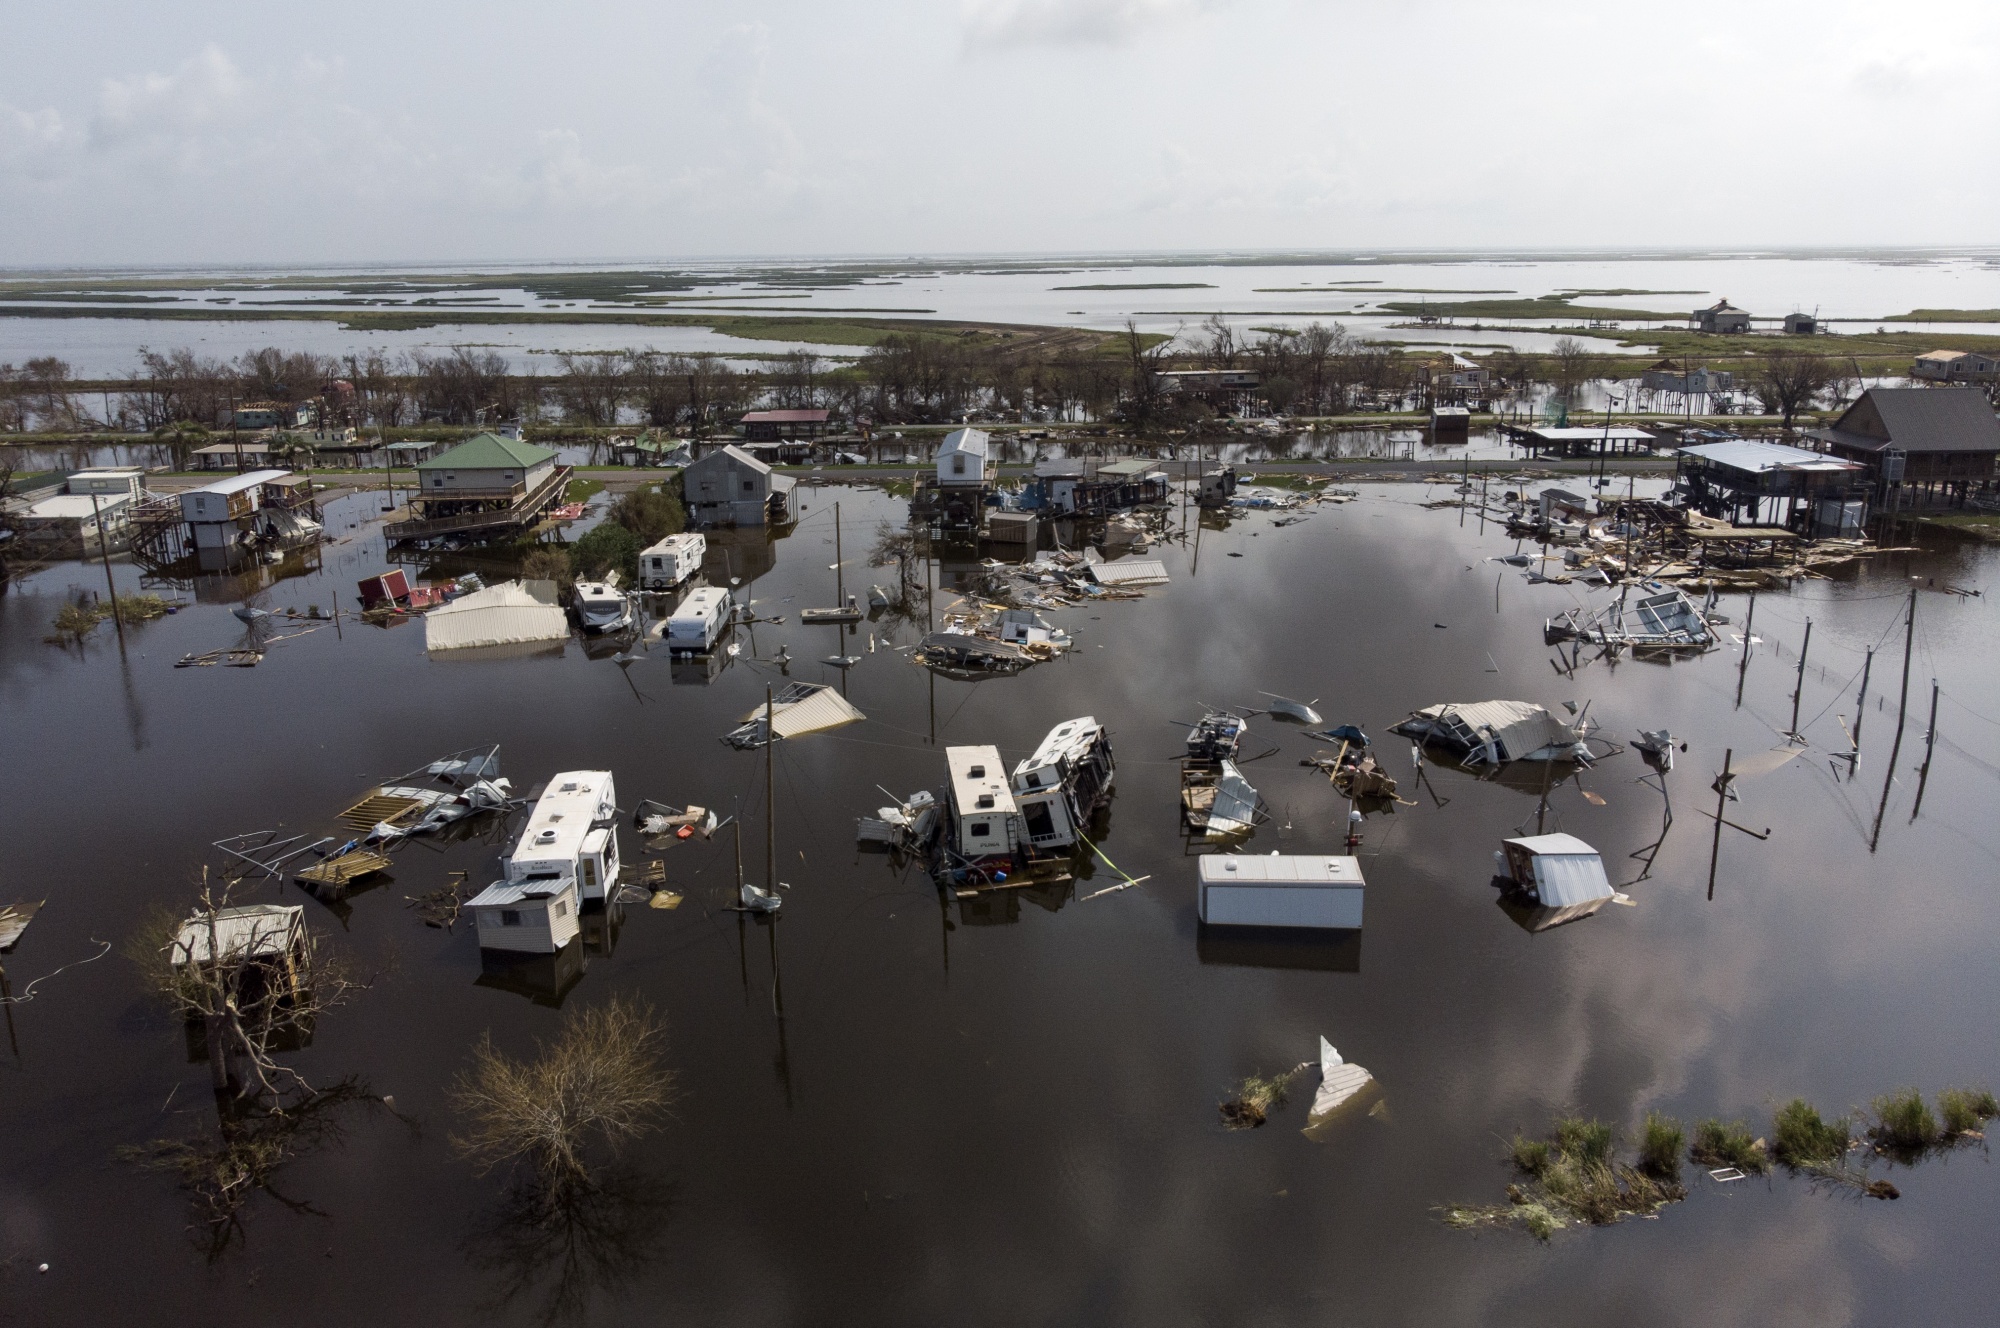 Damaged homes in floodwater after Hurricane Ida in Pointe-Aux-Chenes, Louisiana, on Sept. 2, 2021.